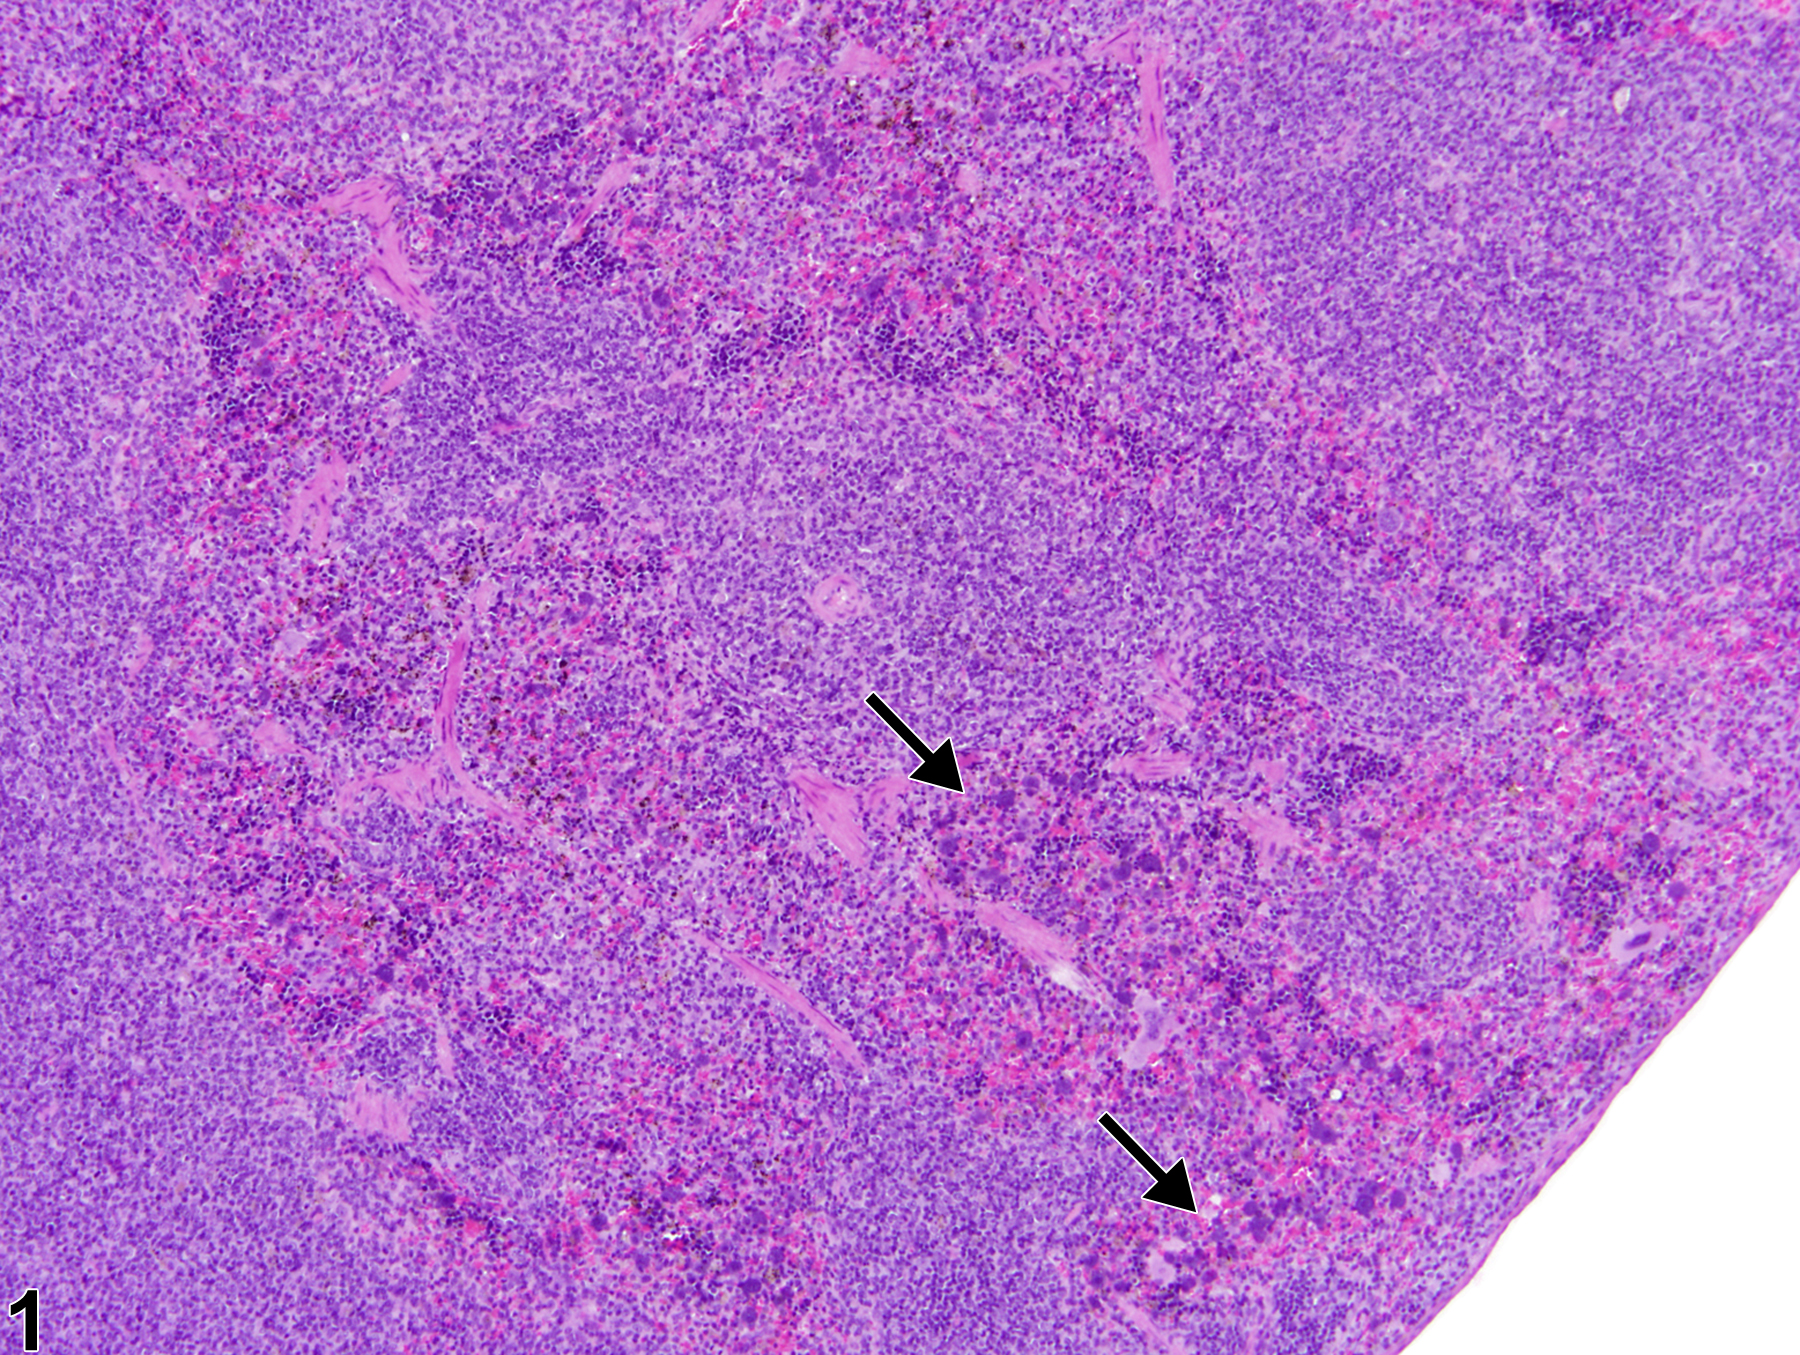 Image of hyperplasia, mast cell in the spleen from a female B6C3F1/N mouse in a chronic study